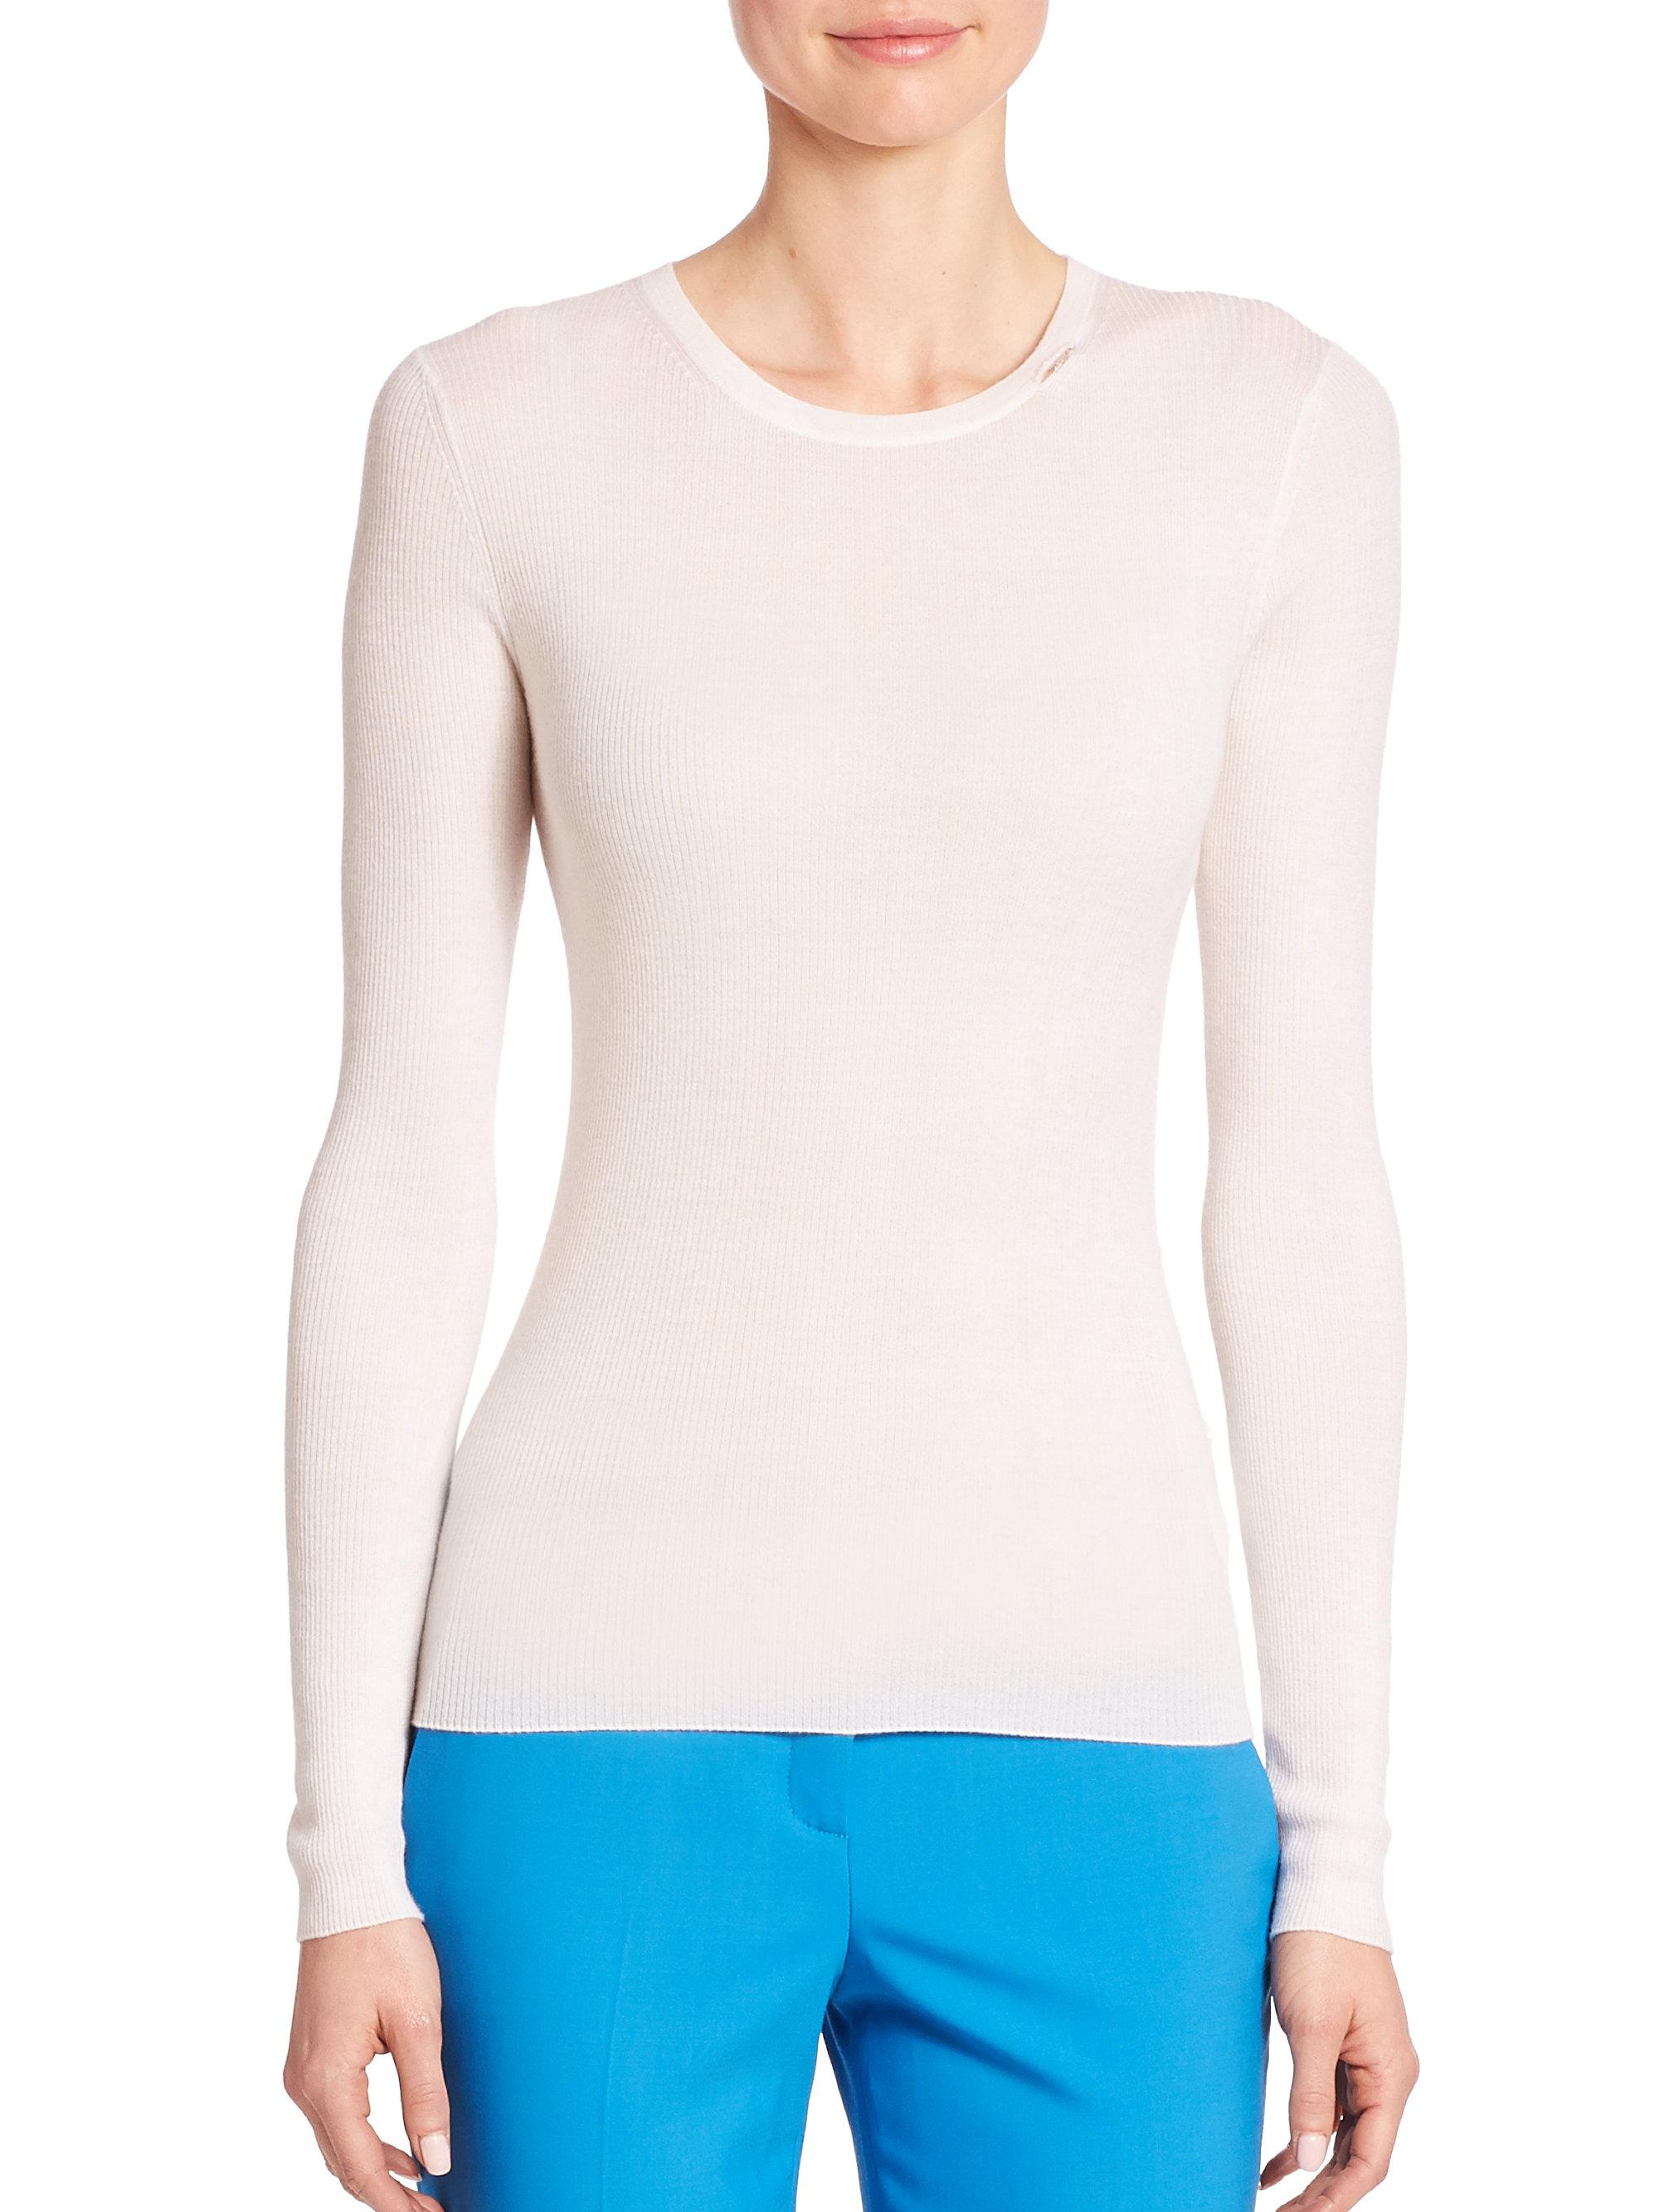 Lyst - Michael Kors Ribbed Cashmere Crewneck Sweater in White